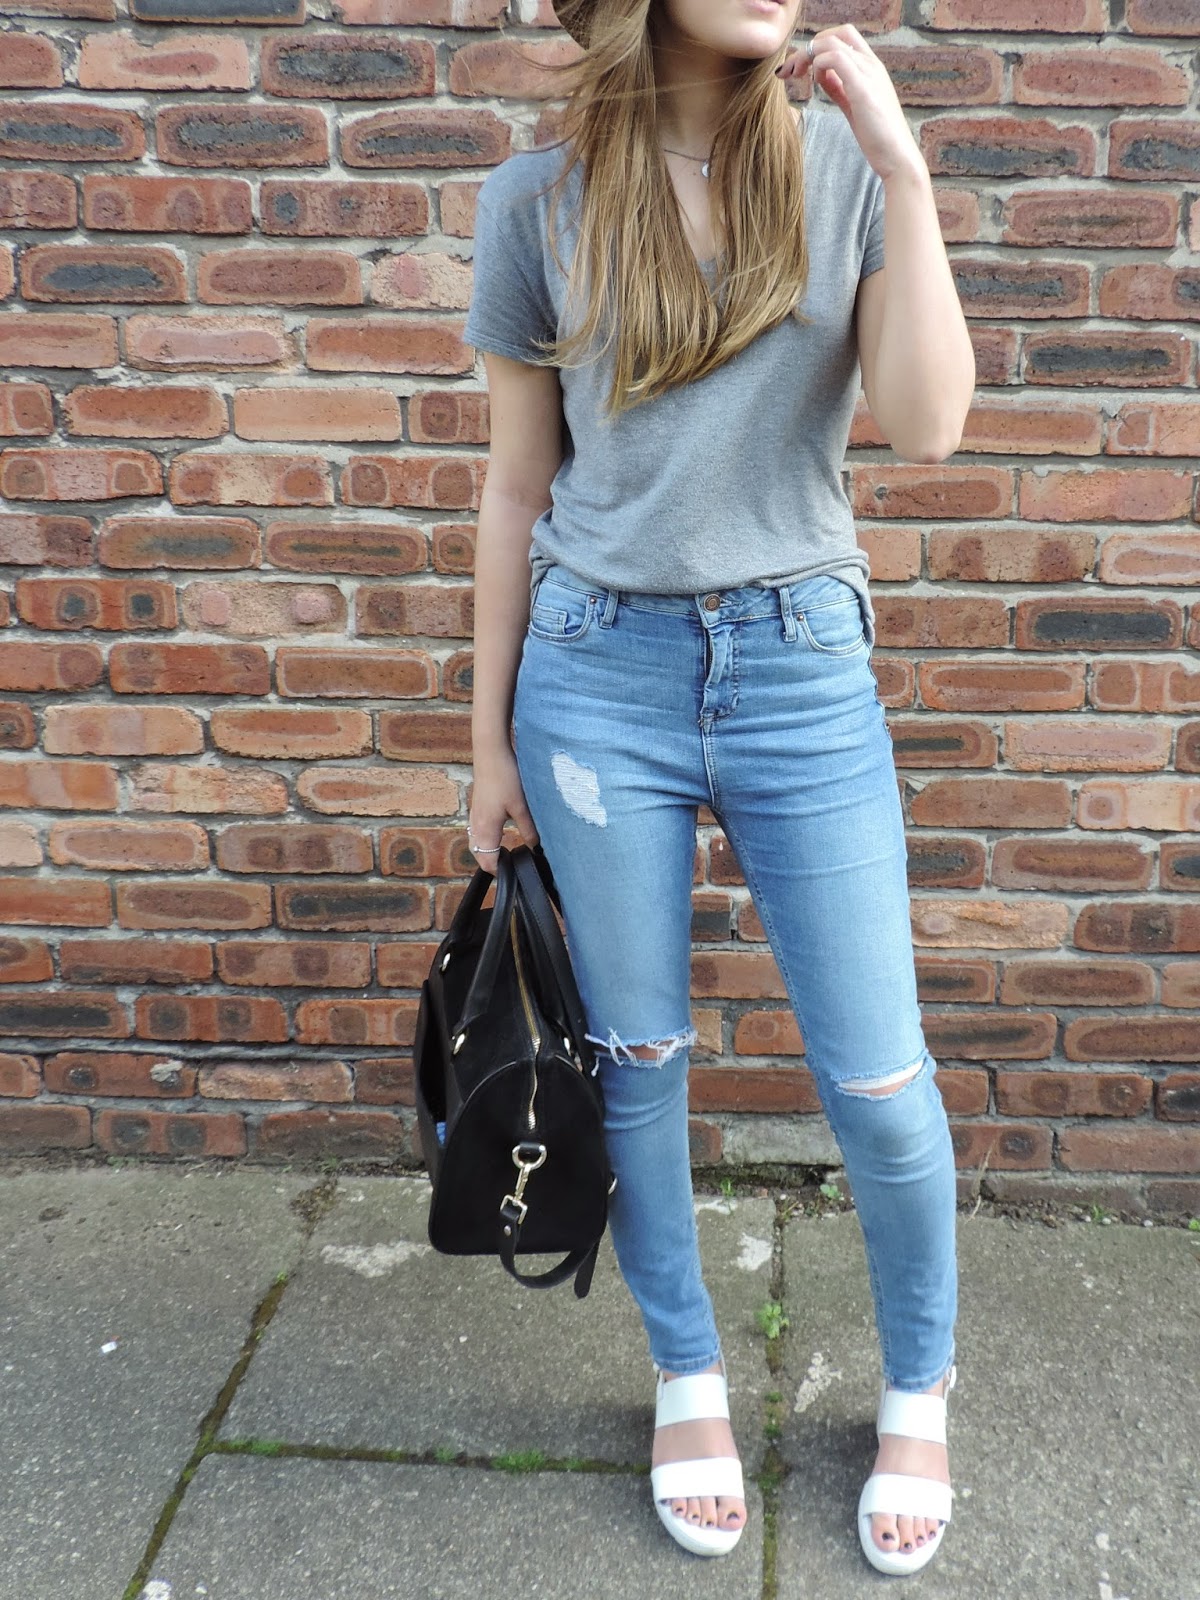 the wallflower: Ripped Denim & Indiana Vibes